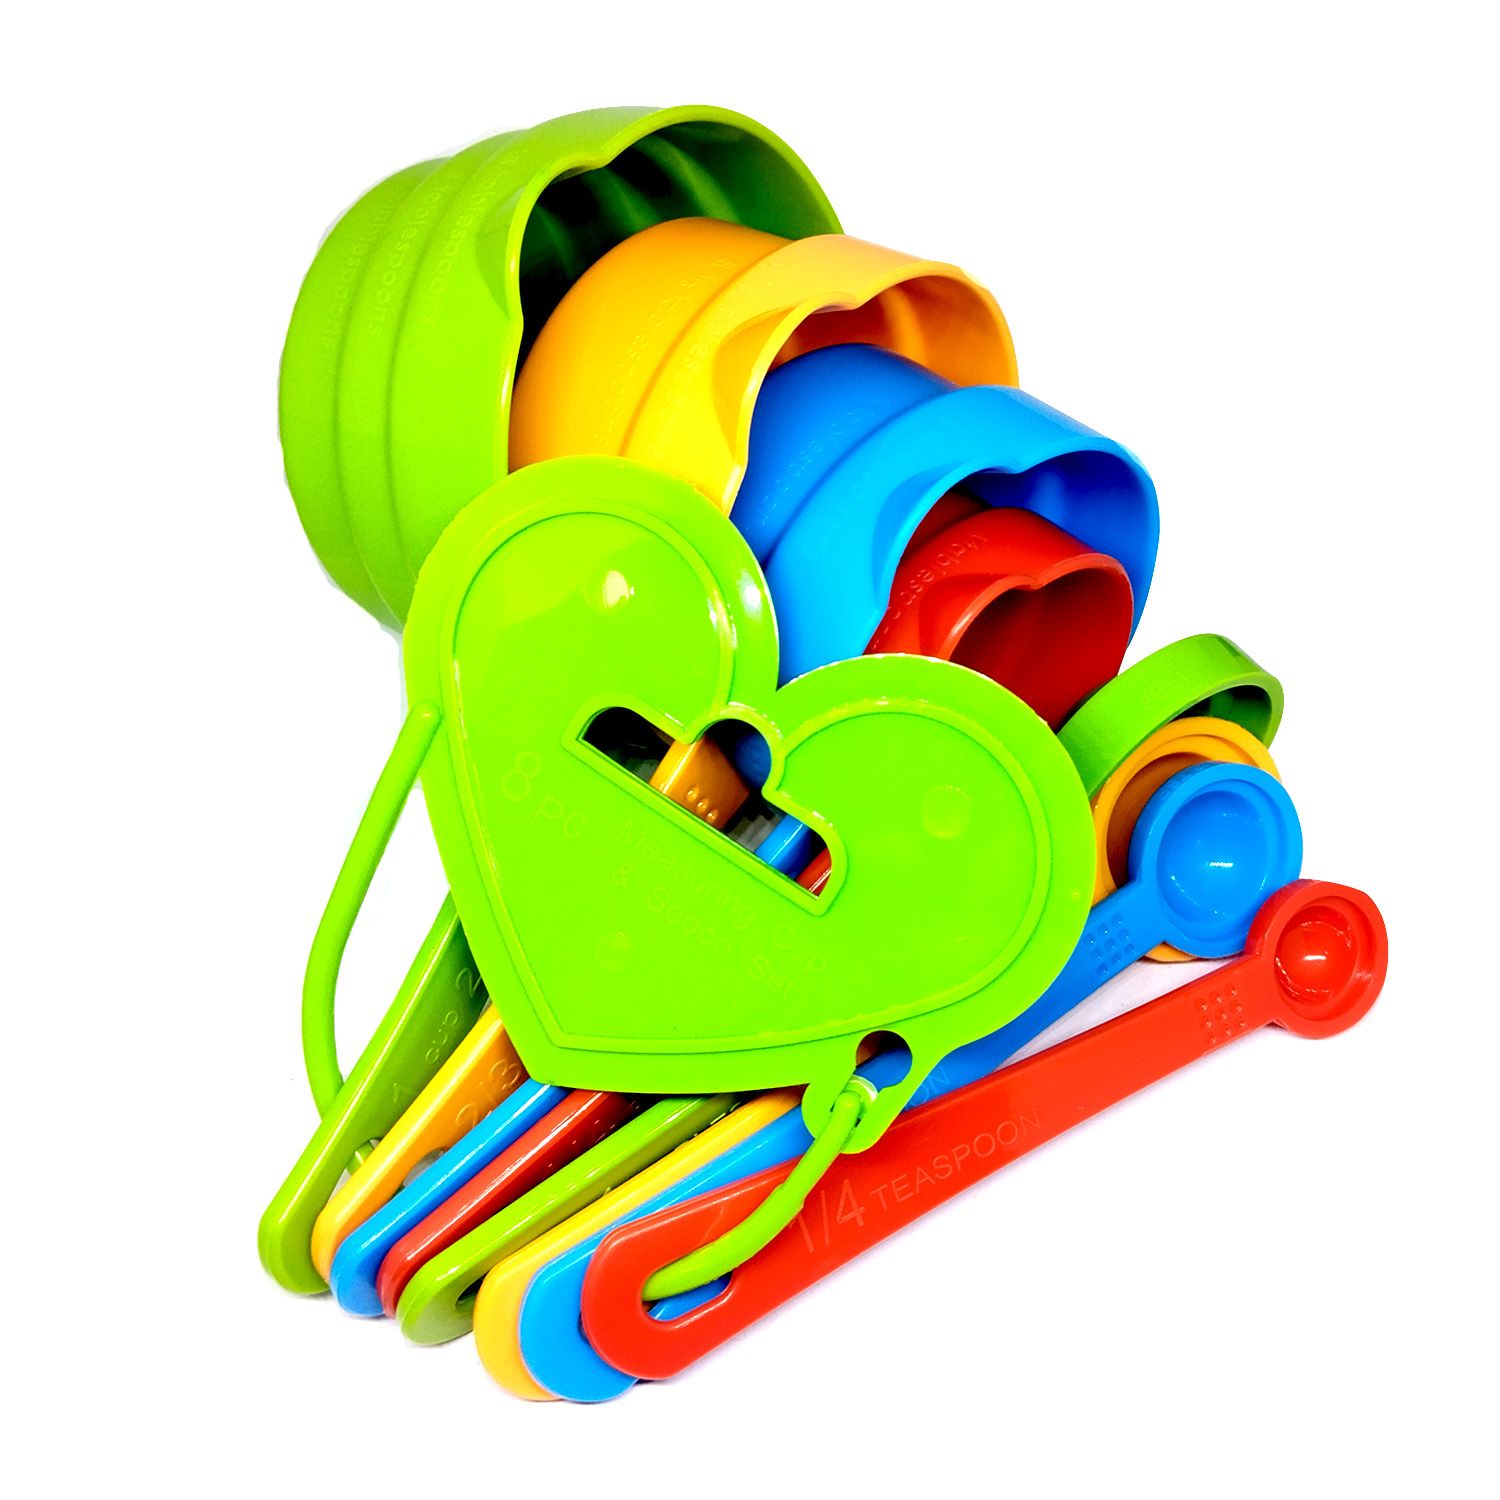 ZURU BUNCH Bright Color Measuring Cups and Spoons Set with Hanging Hook for  Kitchen and Baking